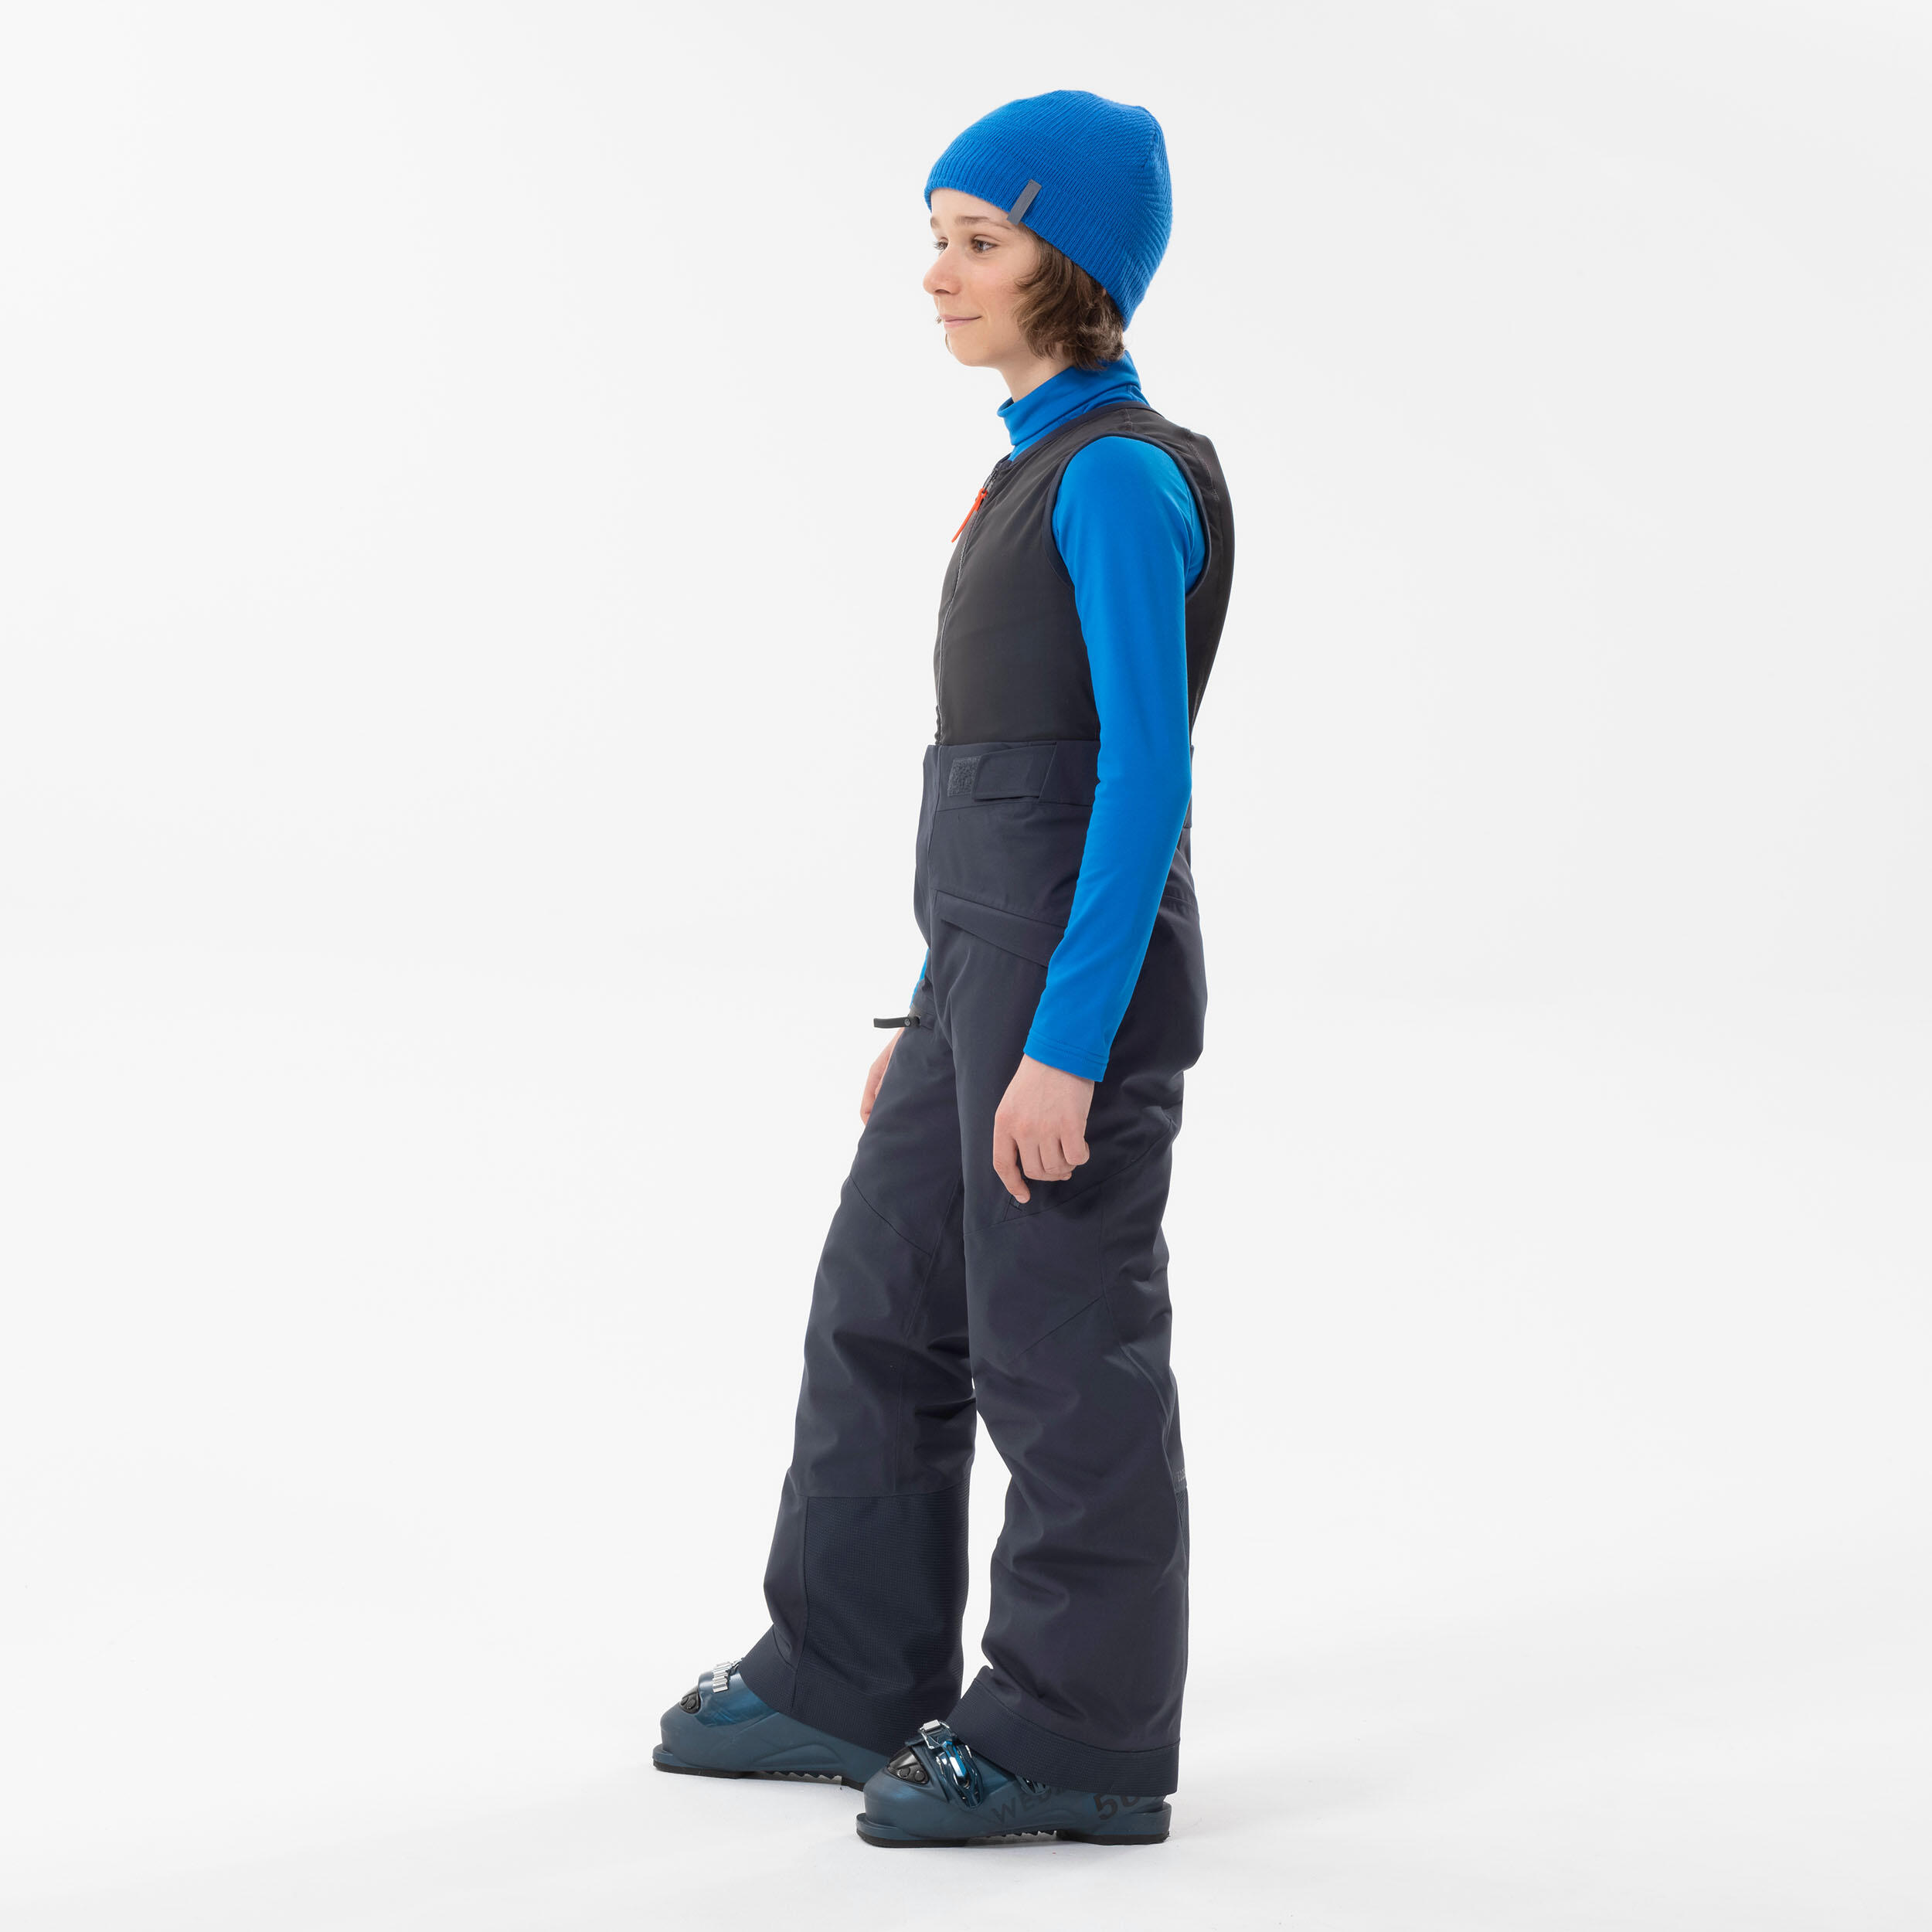 KIDS’ SKI TROUSERS WITH BACK PROTECTOR - FR900 - NAVY BLUE 2/11